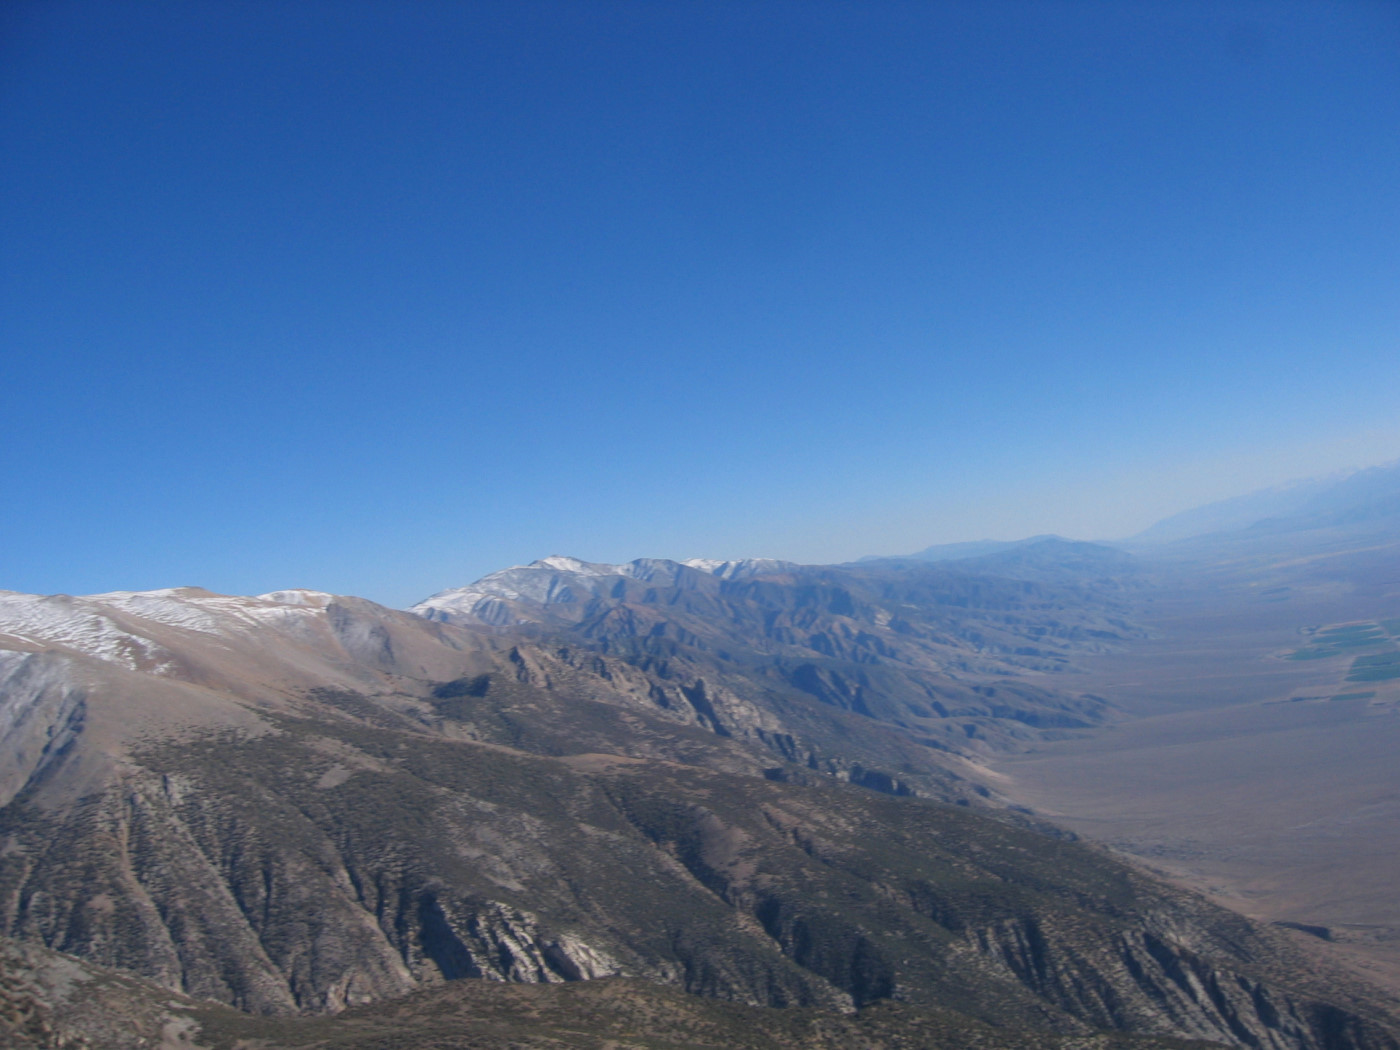 Paragliding in the White Mountains, Owens Valley, CA